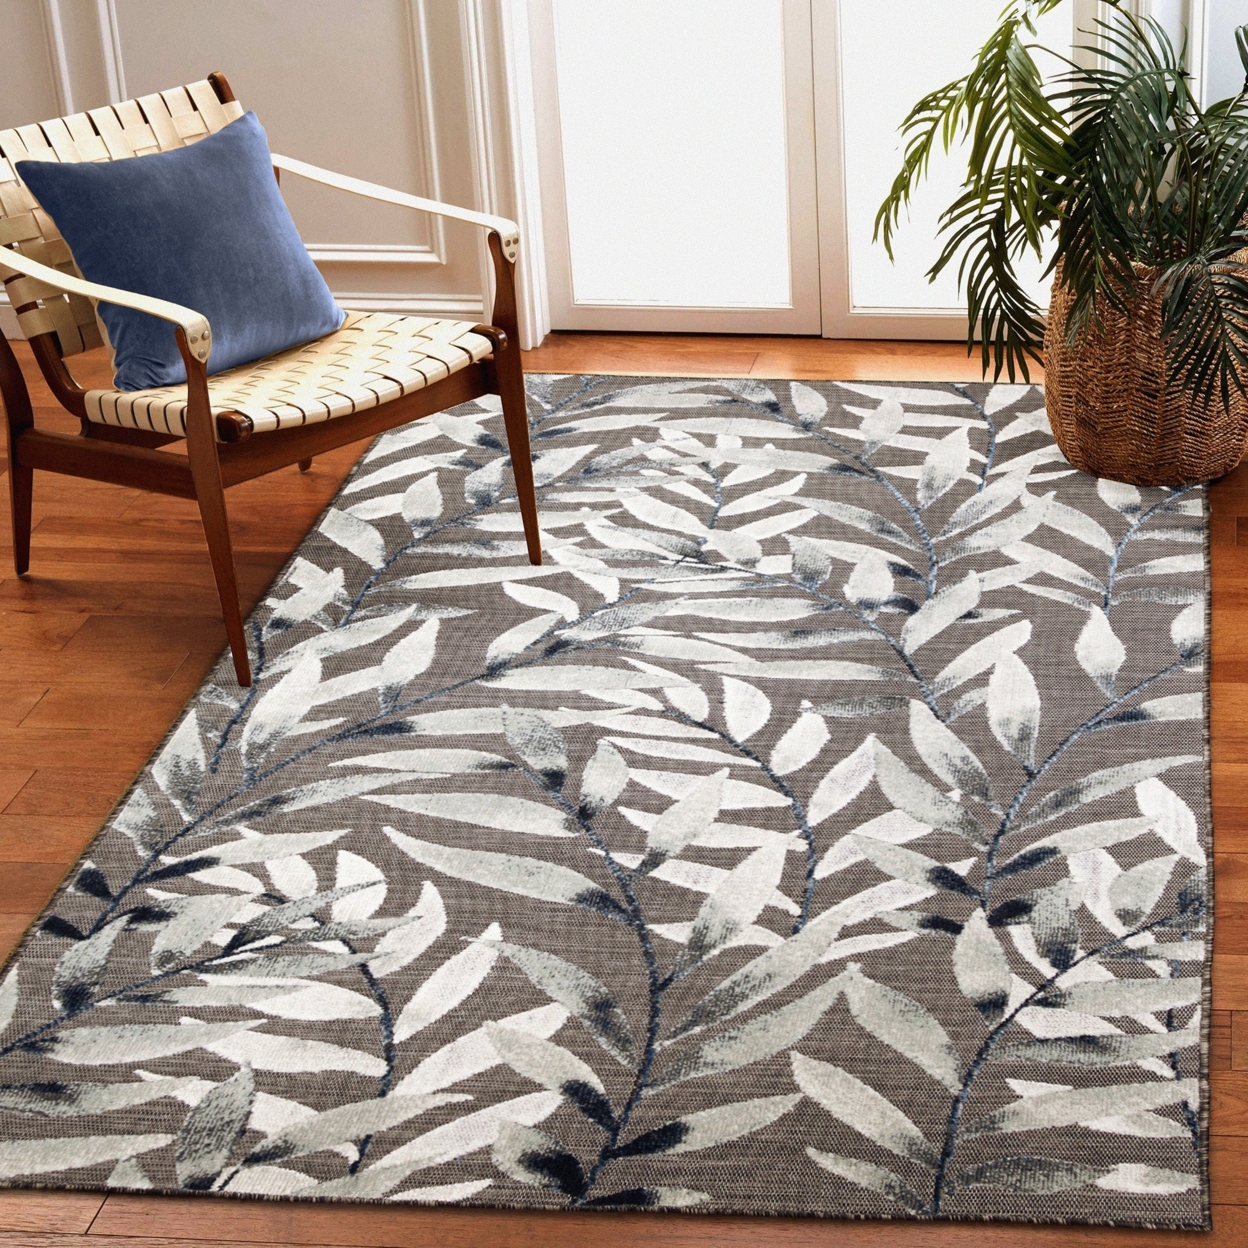 Liora Manne Canyon Vines Indoor Outdoor Area Rug Charcoal - 4'9 X 7'6